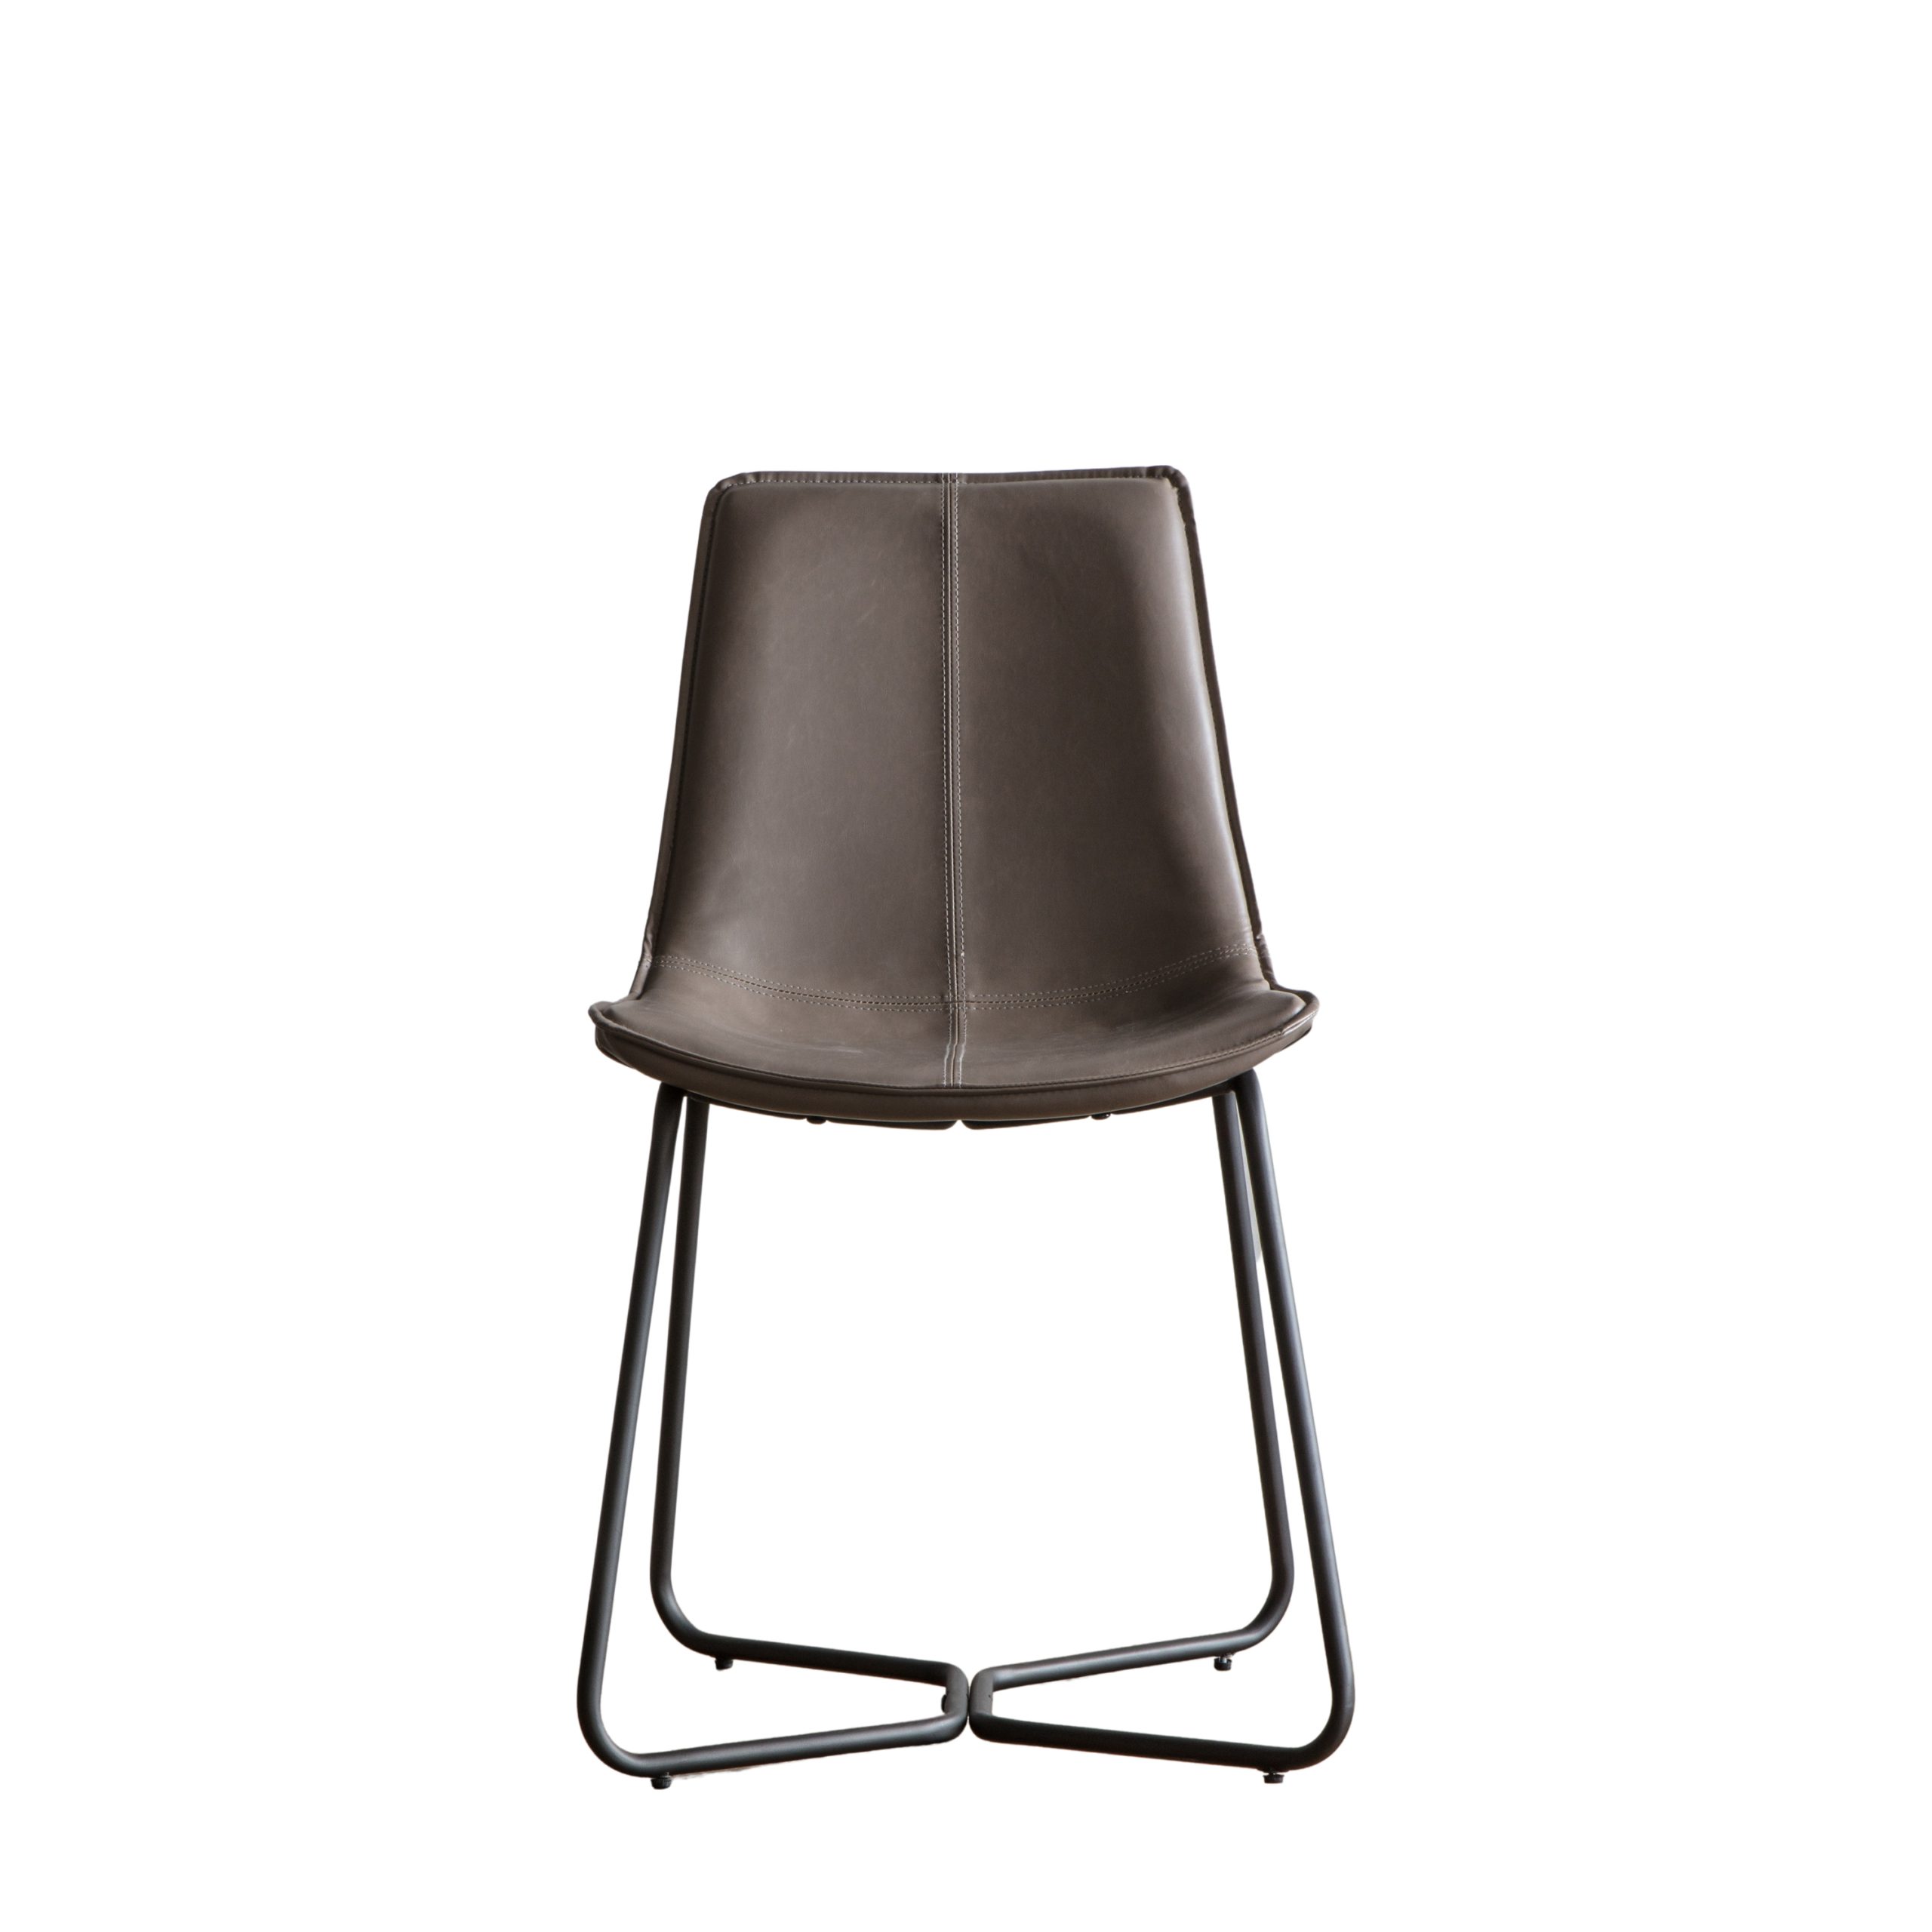 Gallery Direct Hawking Chair Ember (Set of 2)